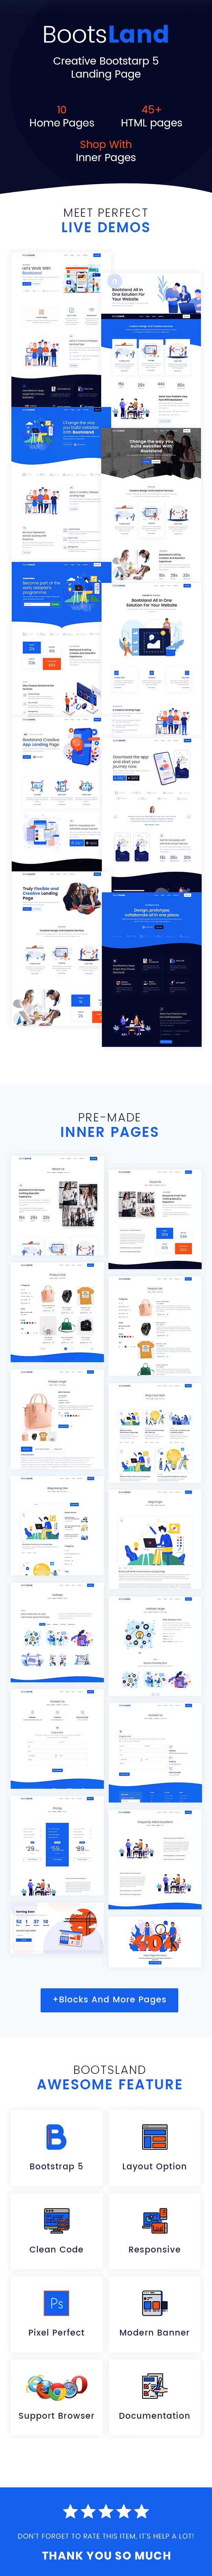 preview - Bootsland - Creative Bootstrap5 Landing Page